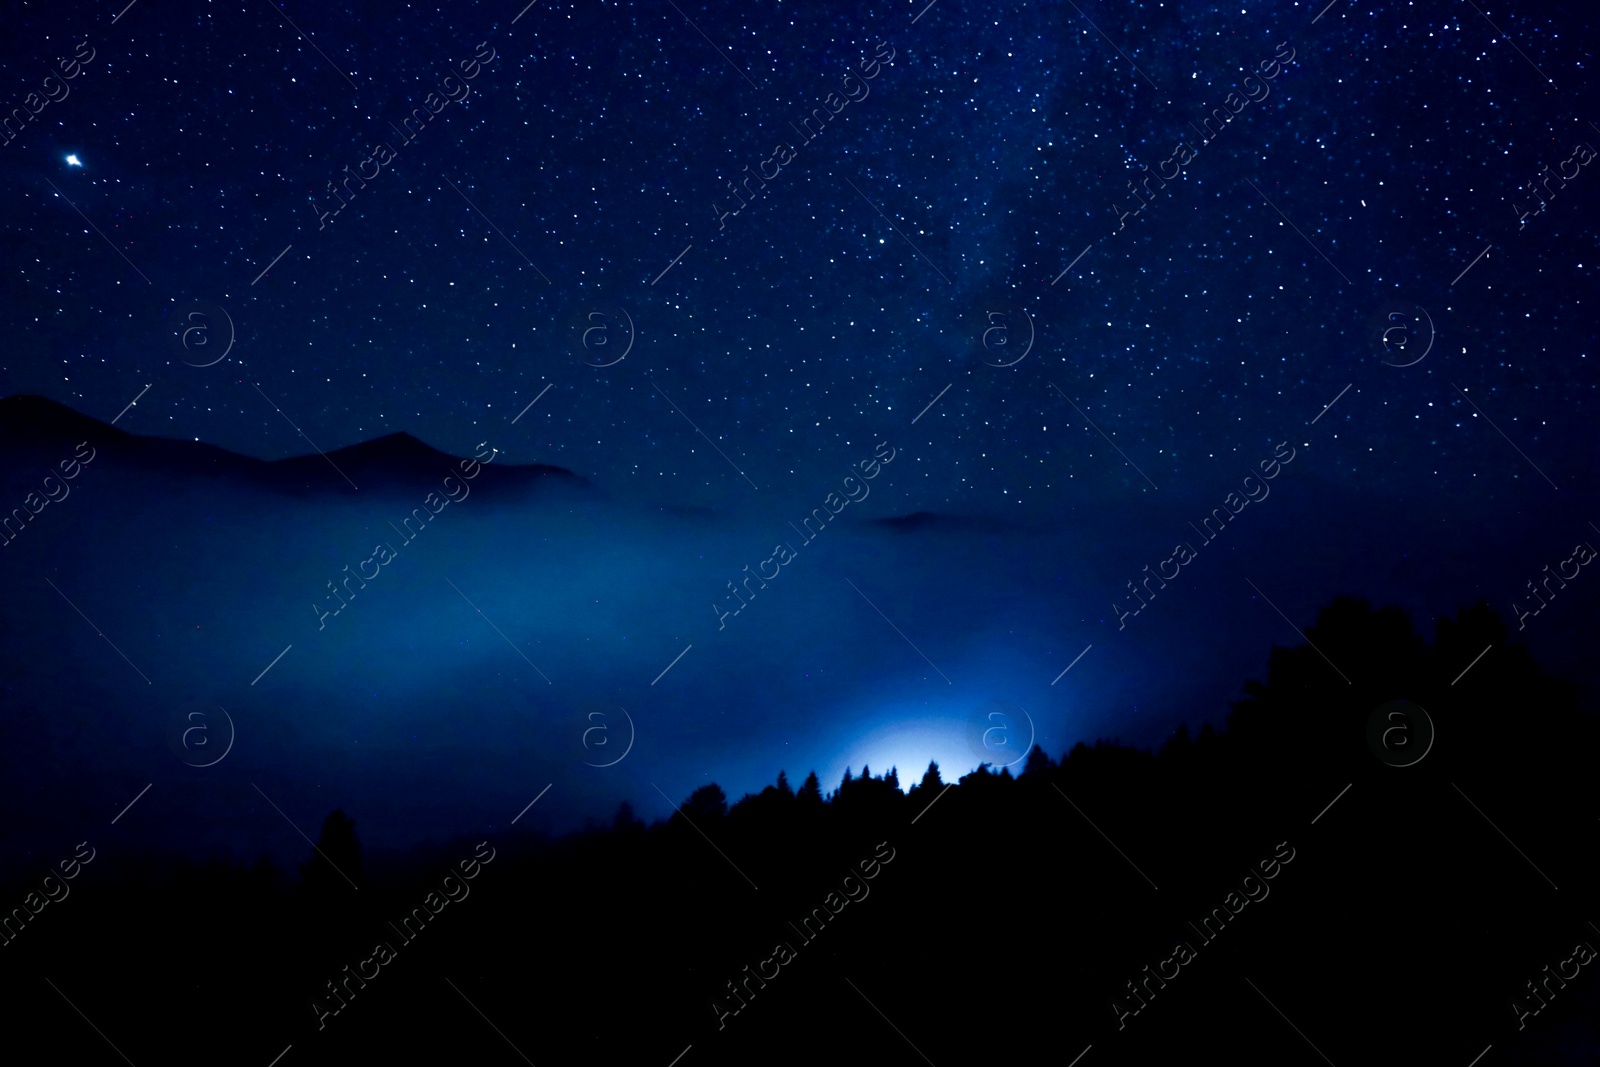 Image of Sky with twinkling stars over mountains at night